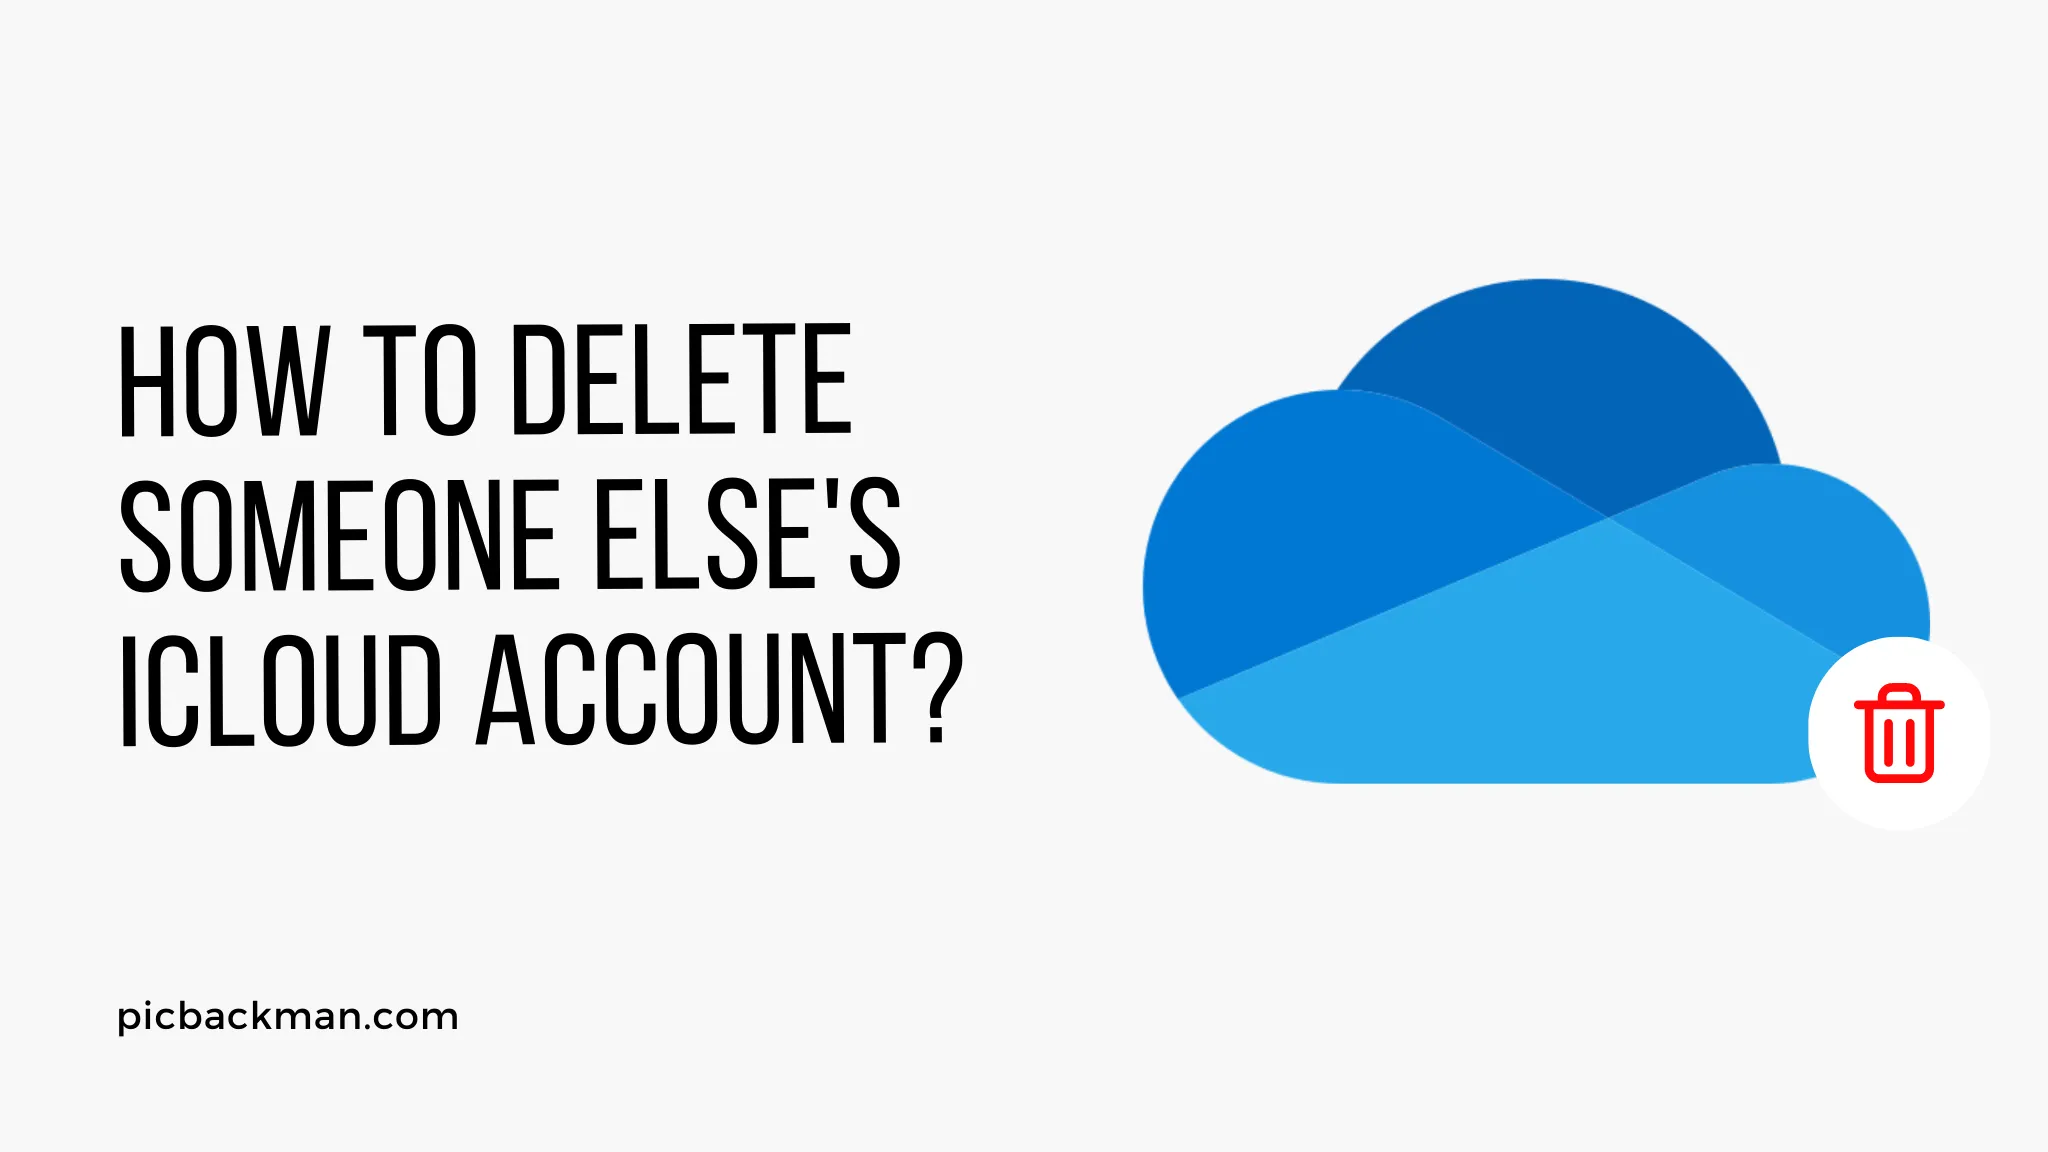 How to Delete Someone Else's iCloud Account